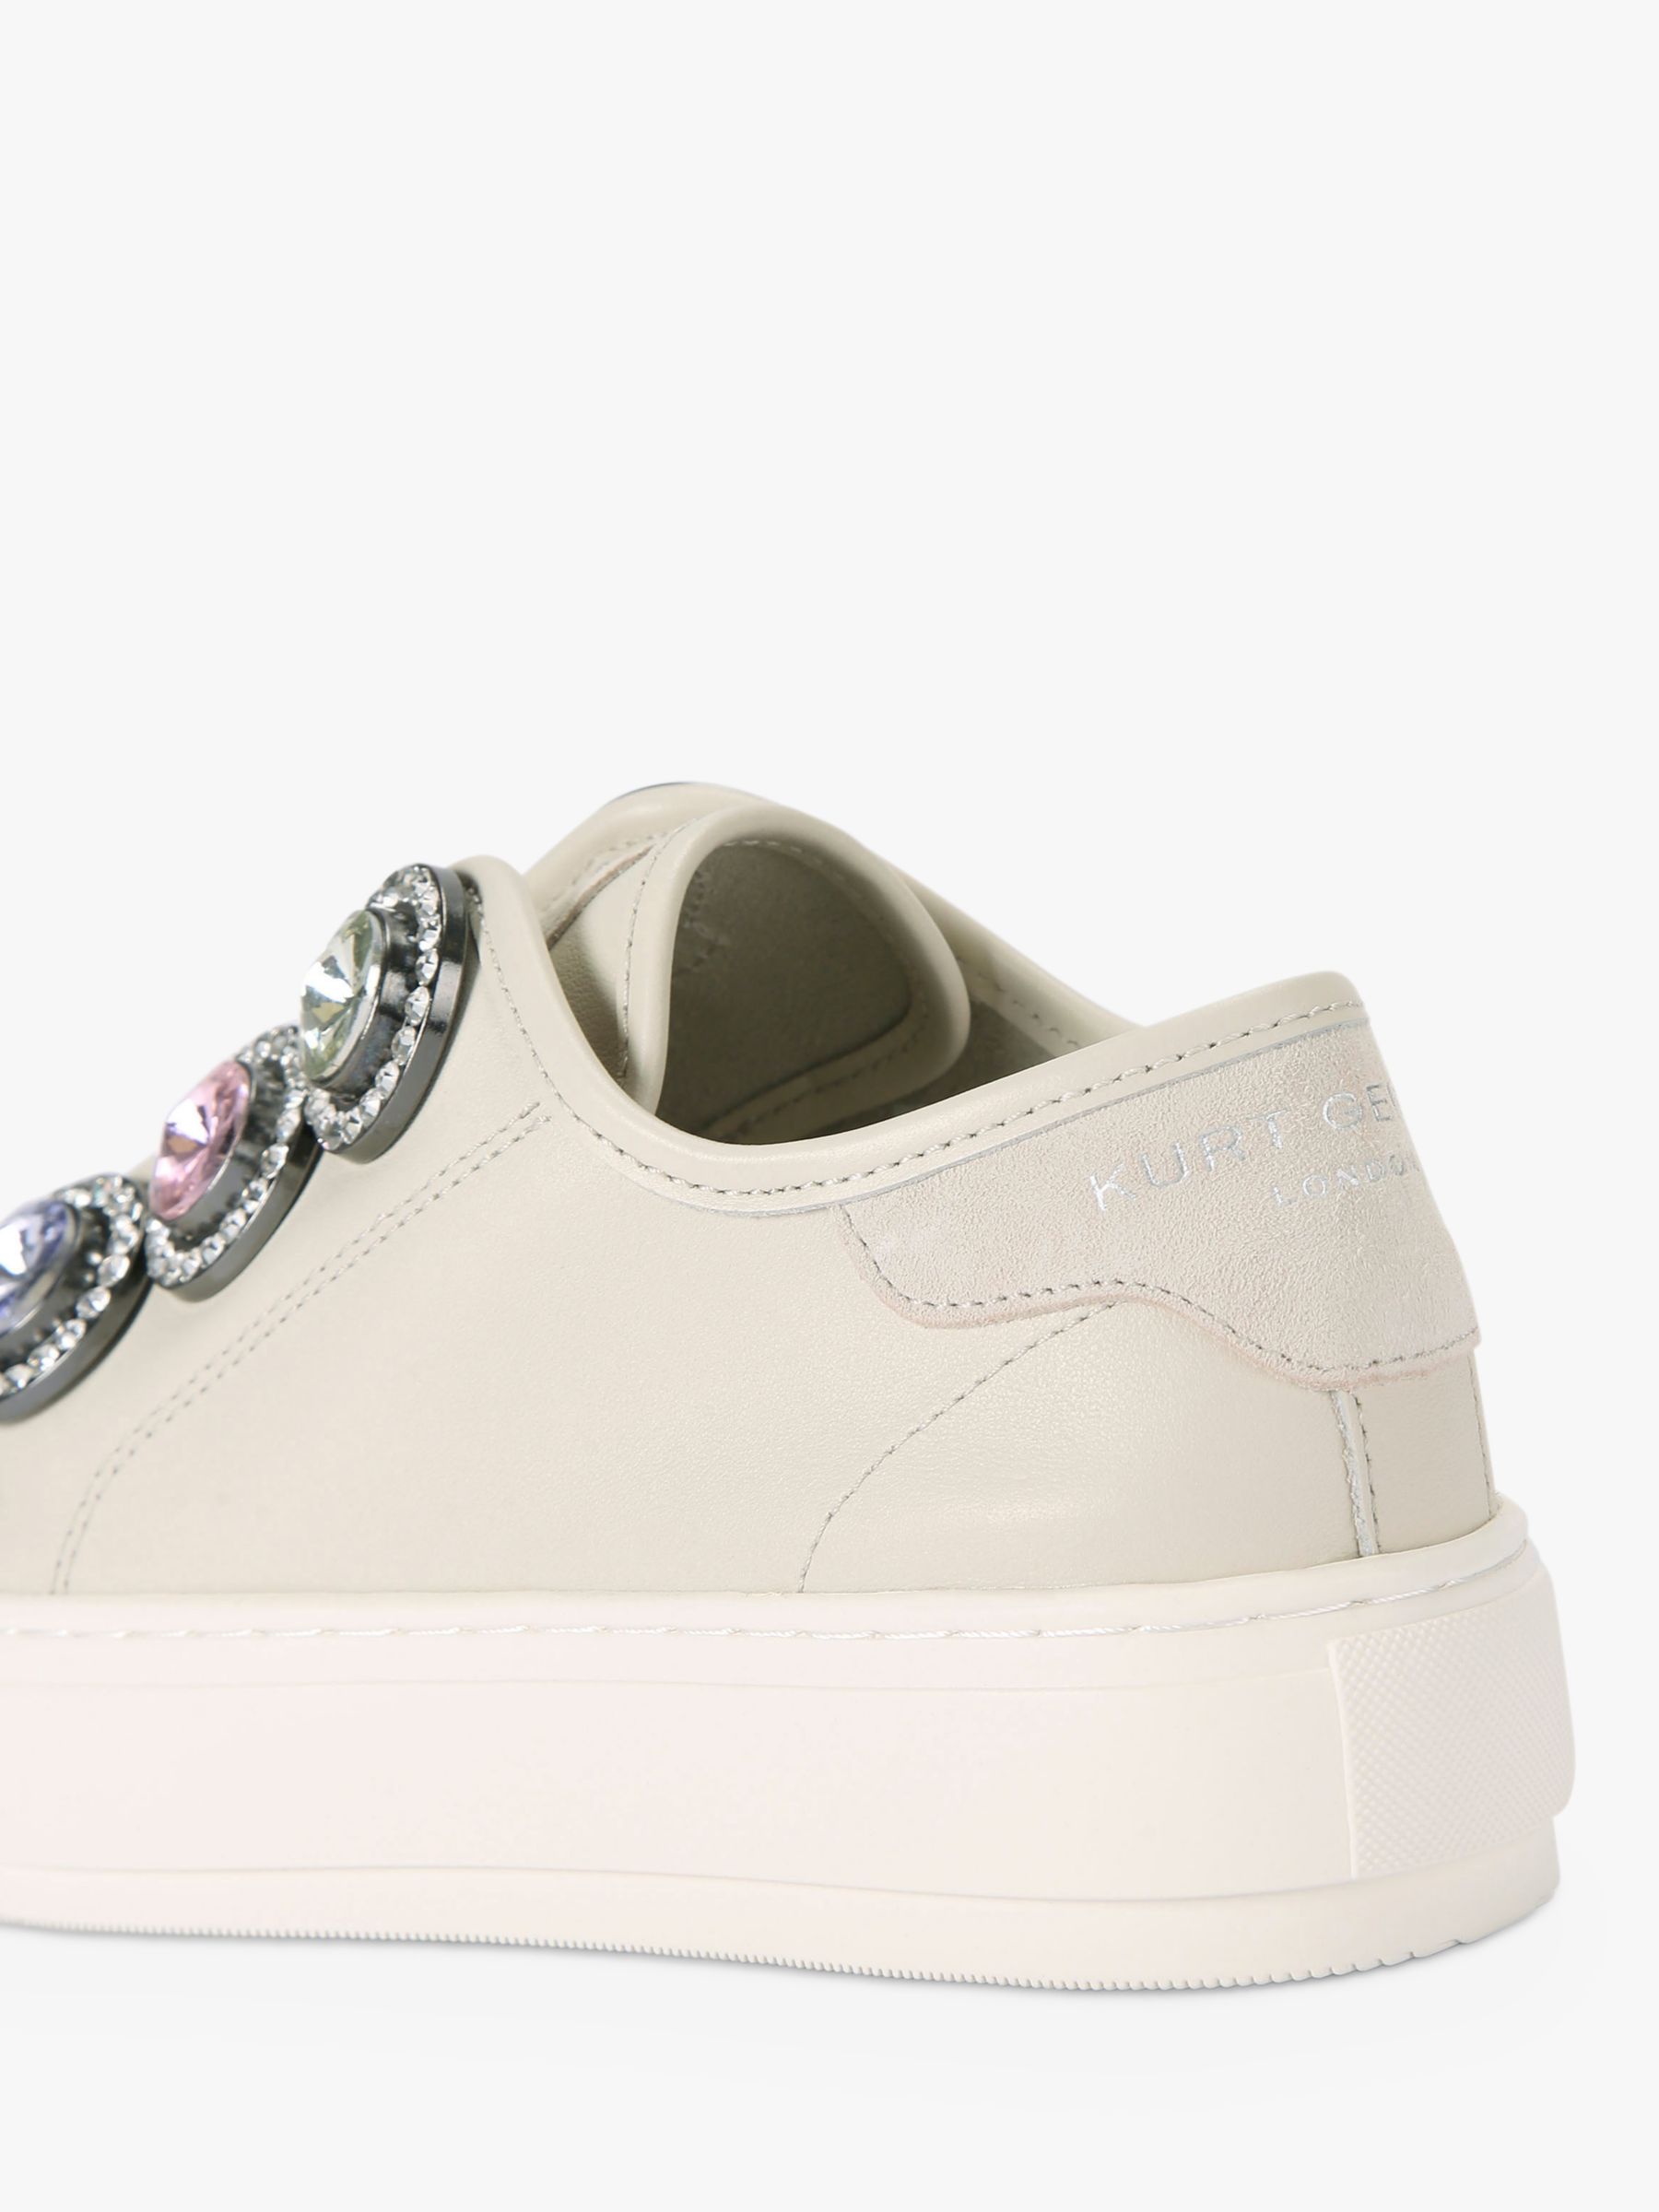 Buy Kurt Geiger London Laney Octavia Leather Trainers, Natural Putty Online at johnlewis.com